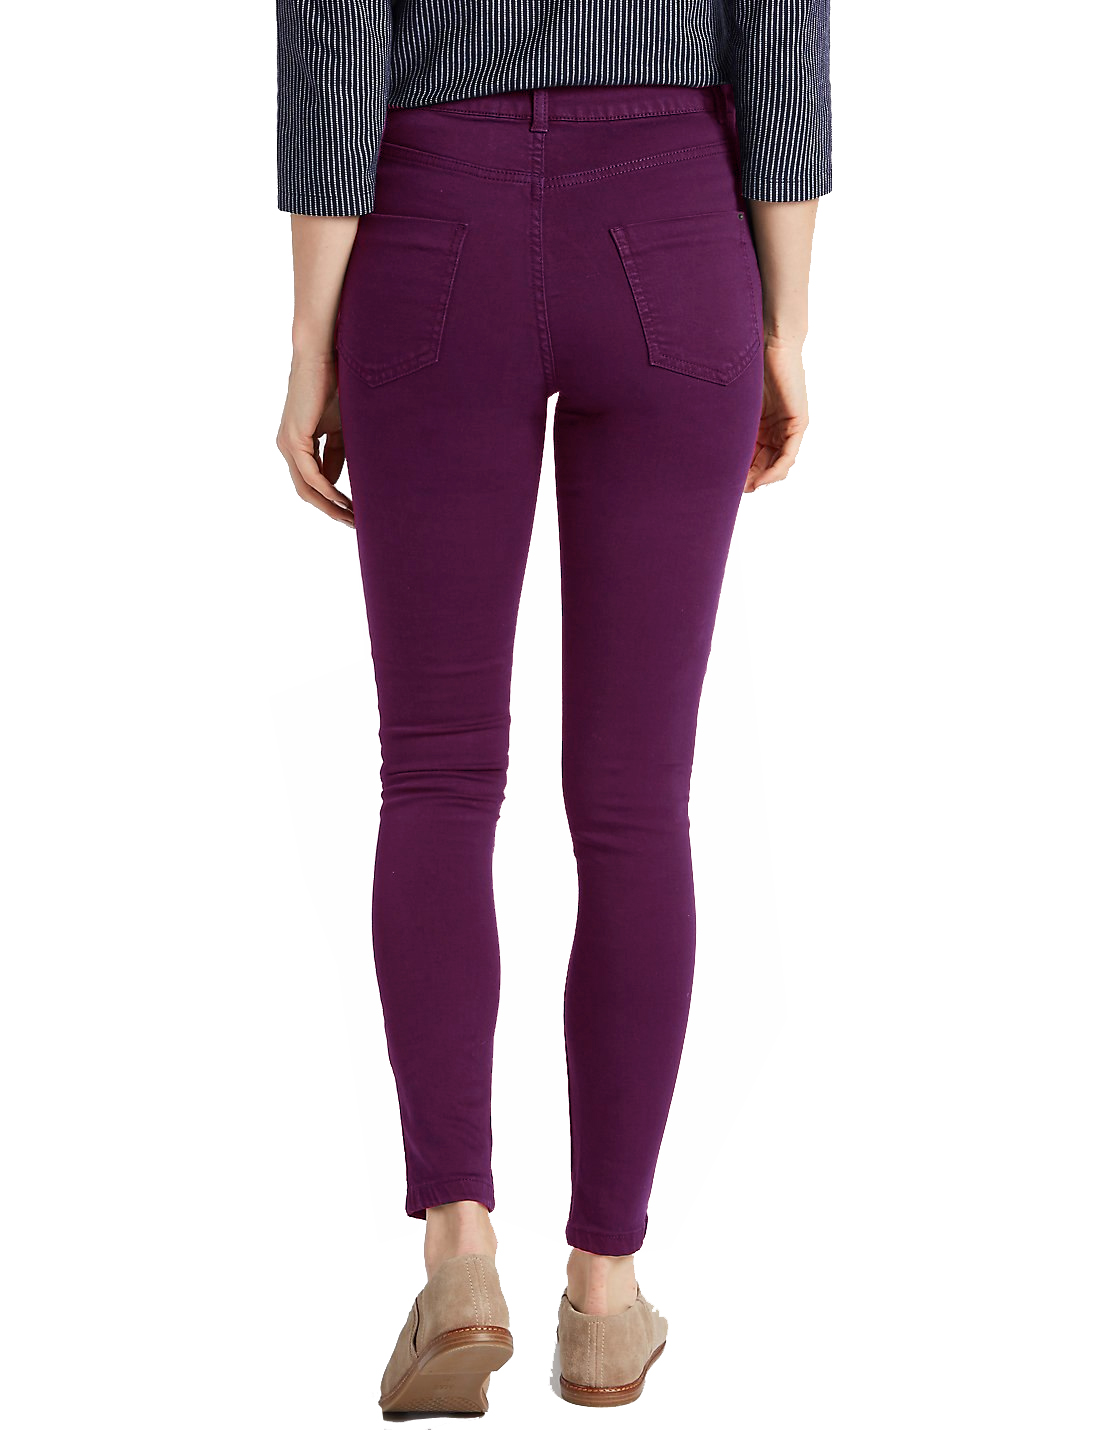 Marks and Spencer - - M&5 PLUM Mid Rise Super Skinny Jeans - Size 8 to 18